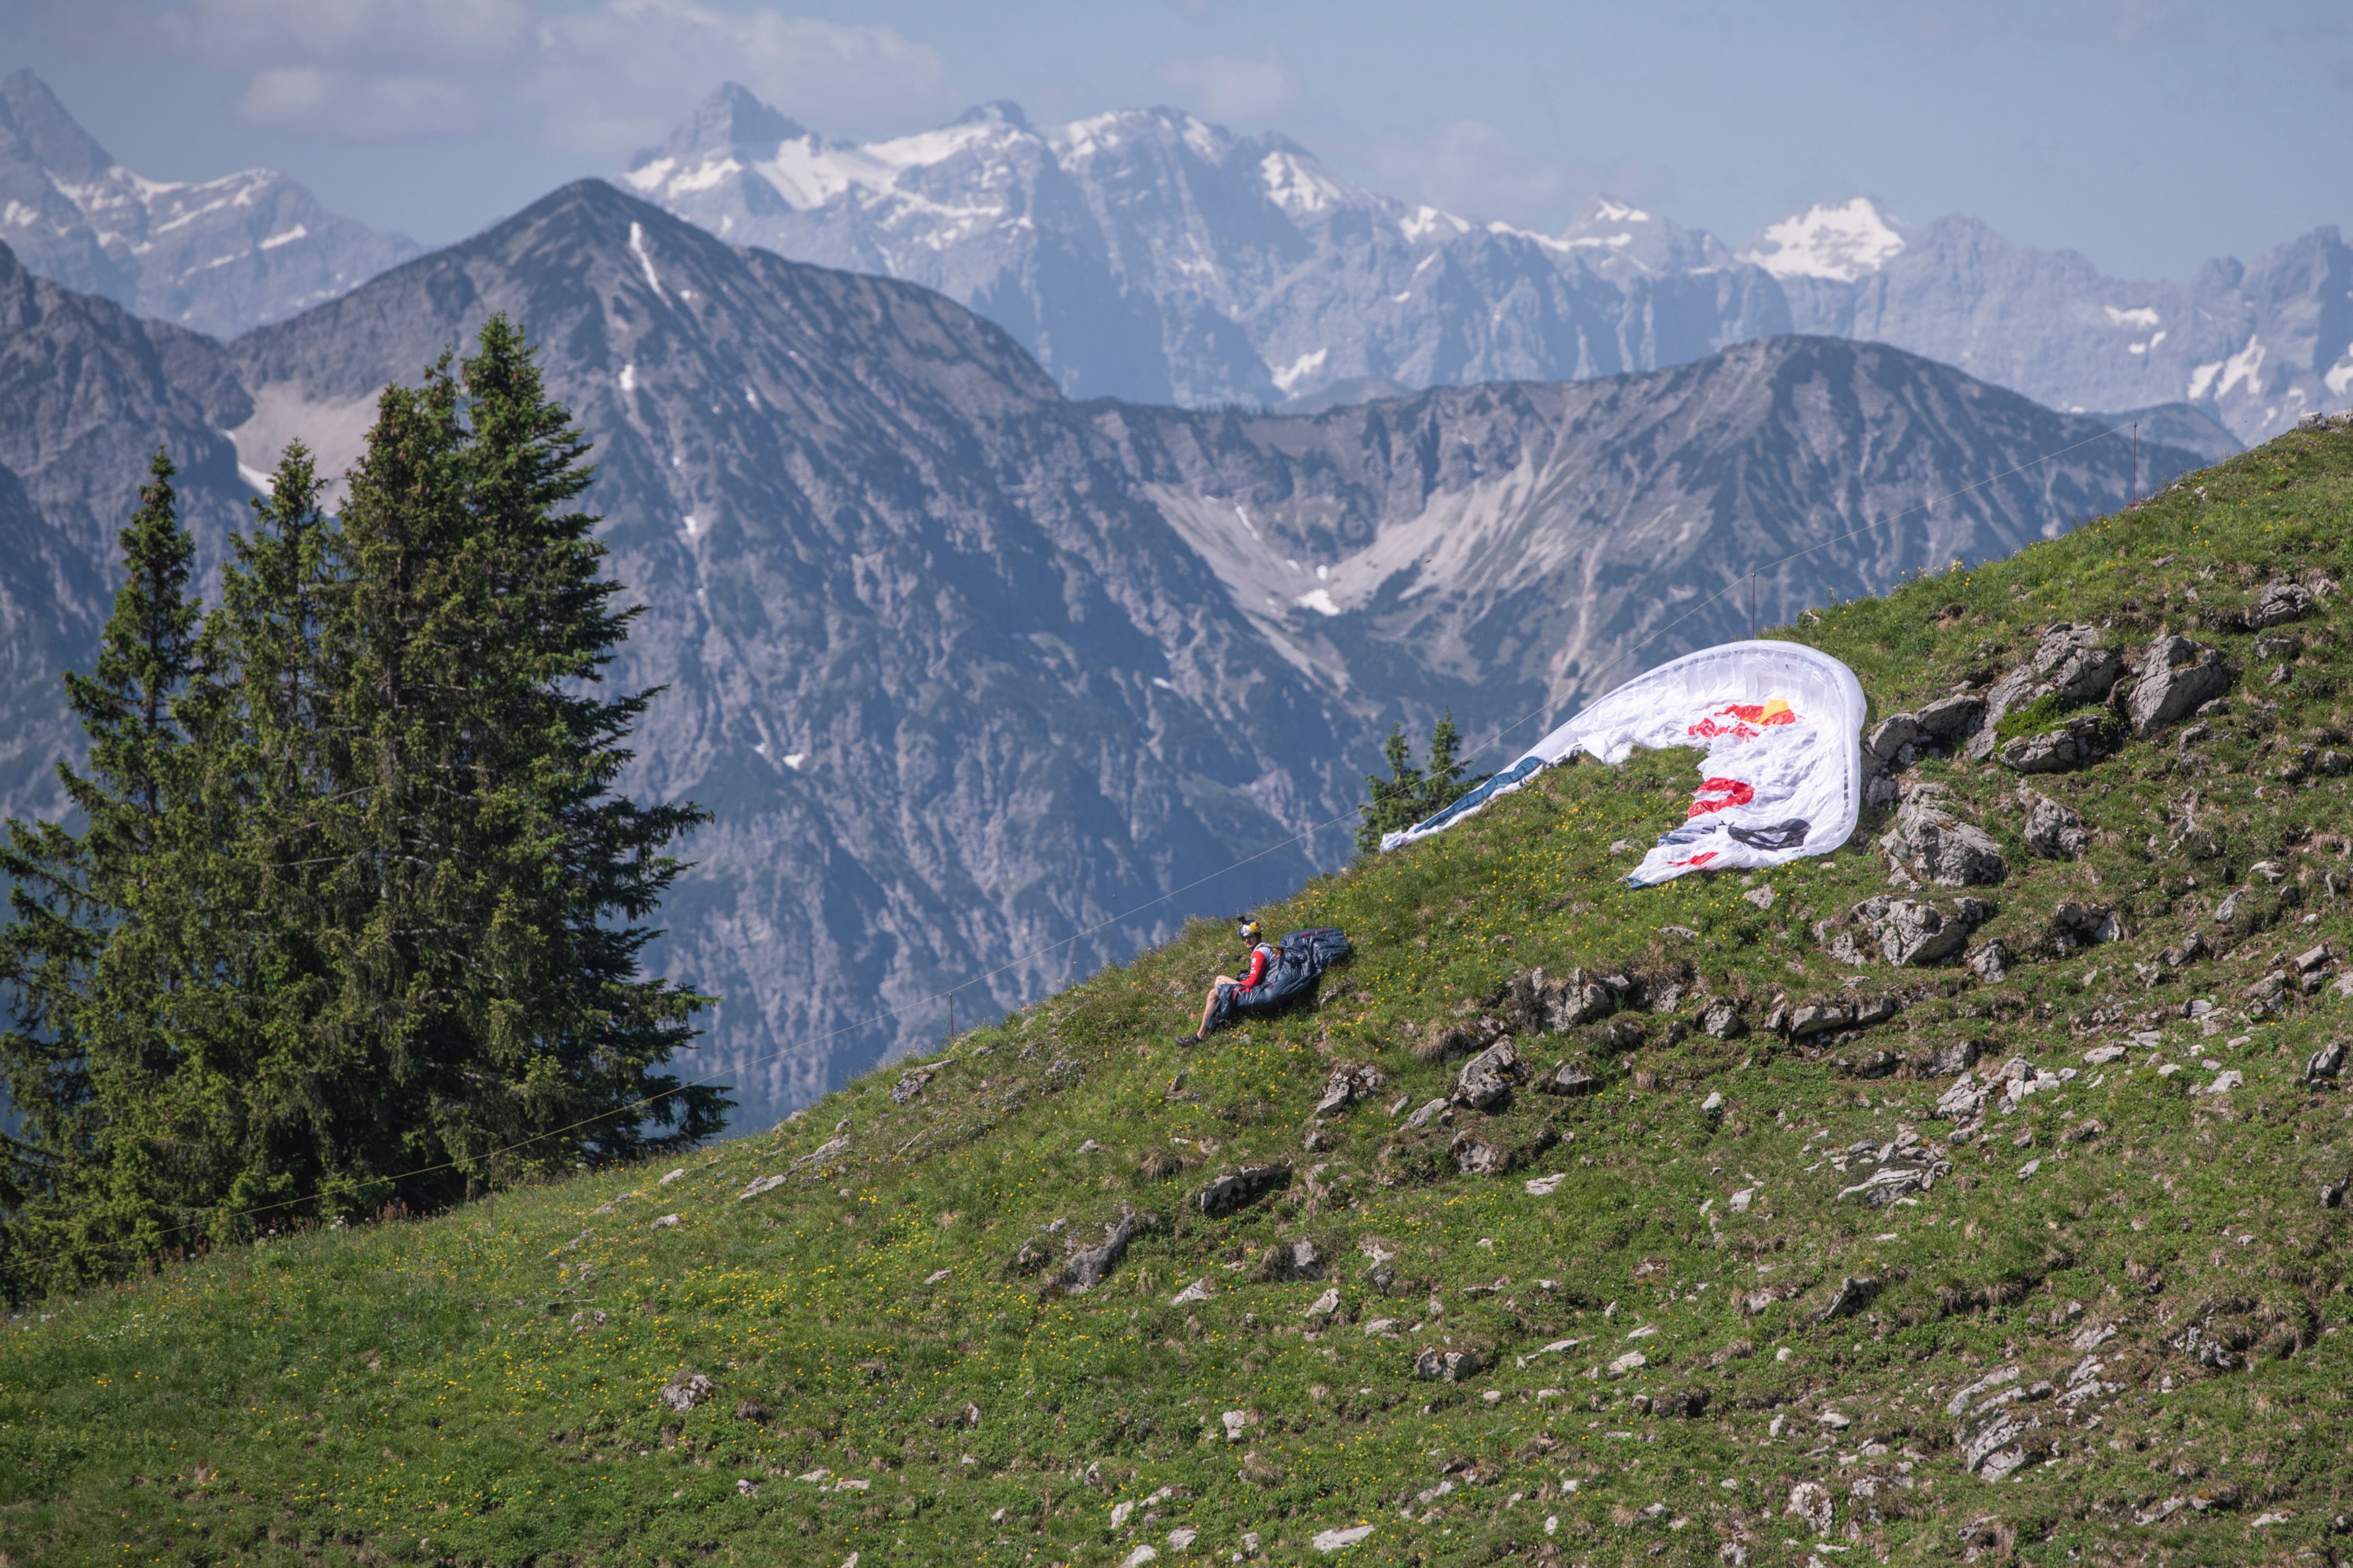 Paul Guschlbauer (AUT1) waits for thermals at the mountain range Karwendel prior to the Red Bull X-Alps, Austria on June 22, 2021.